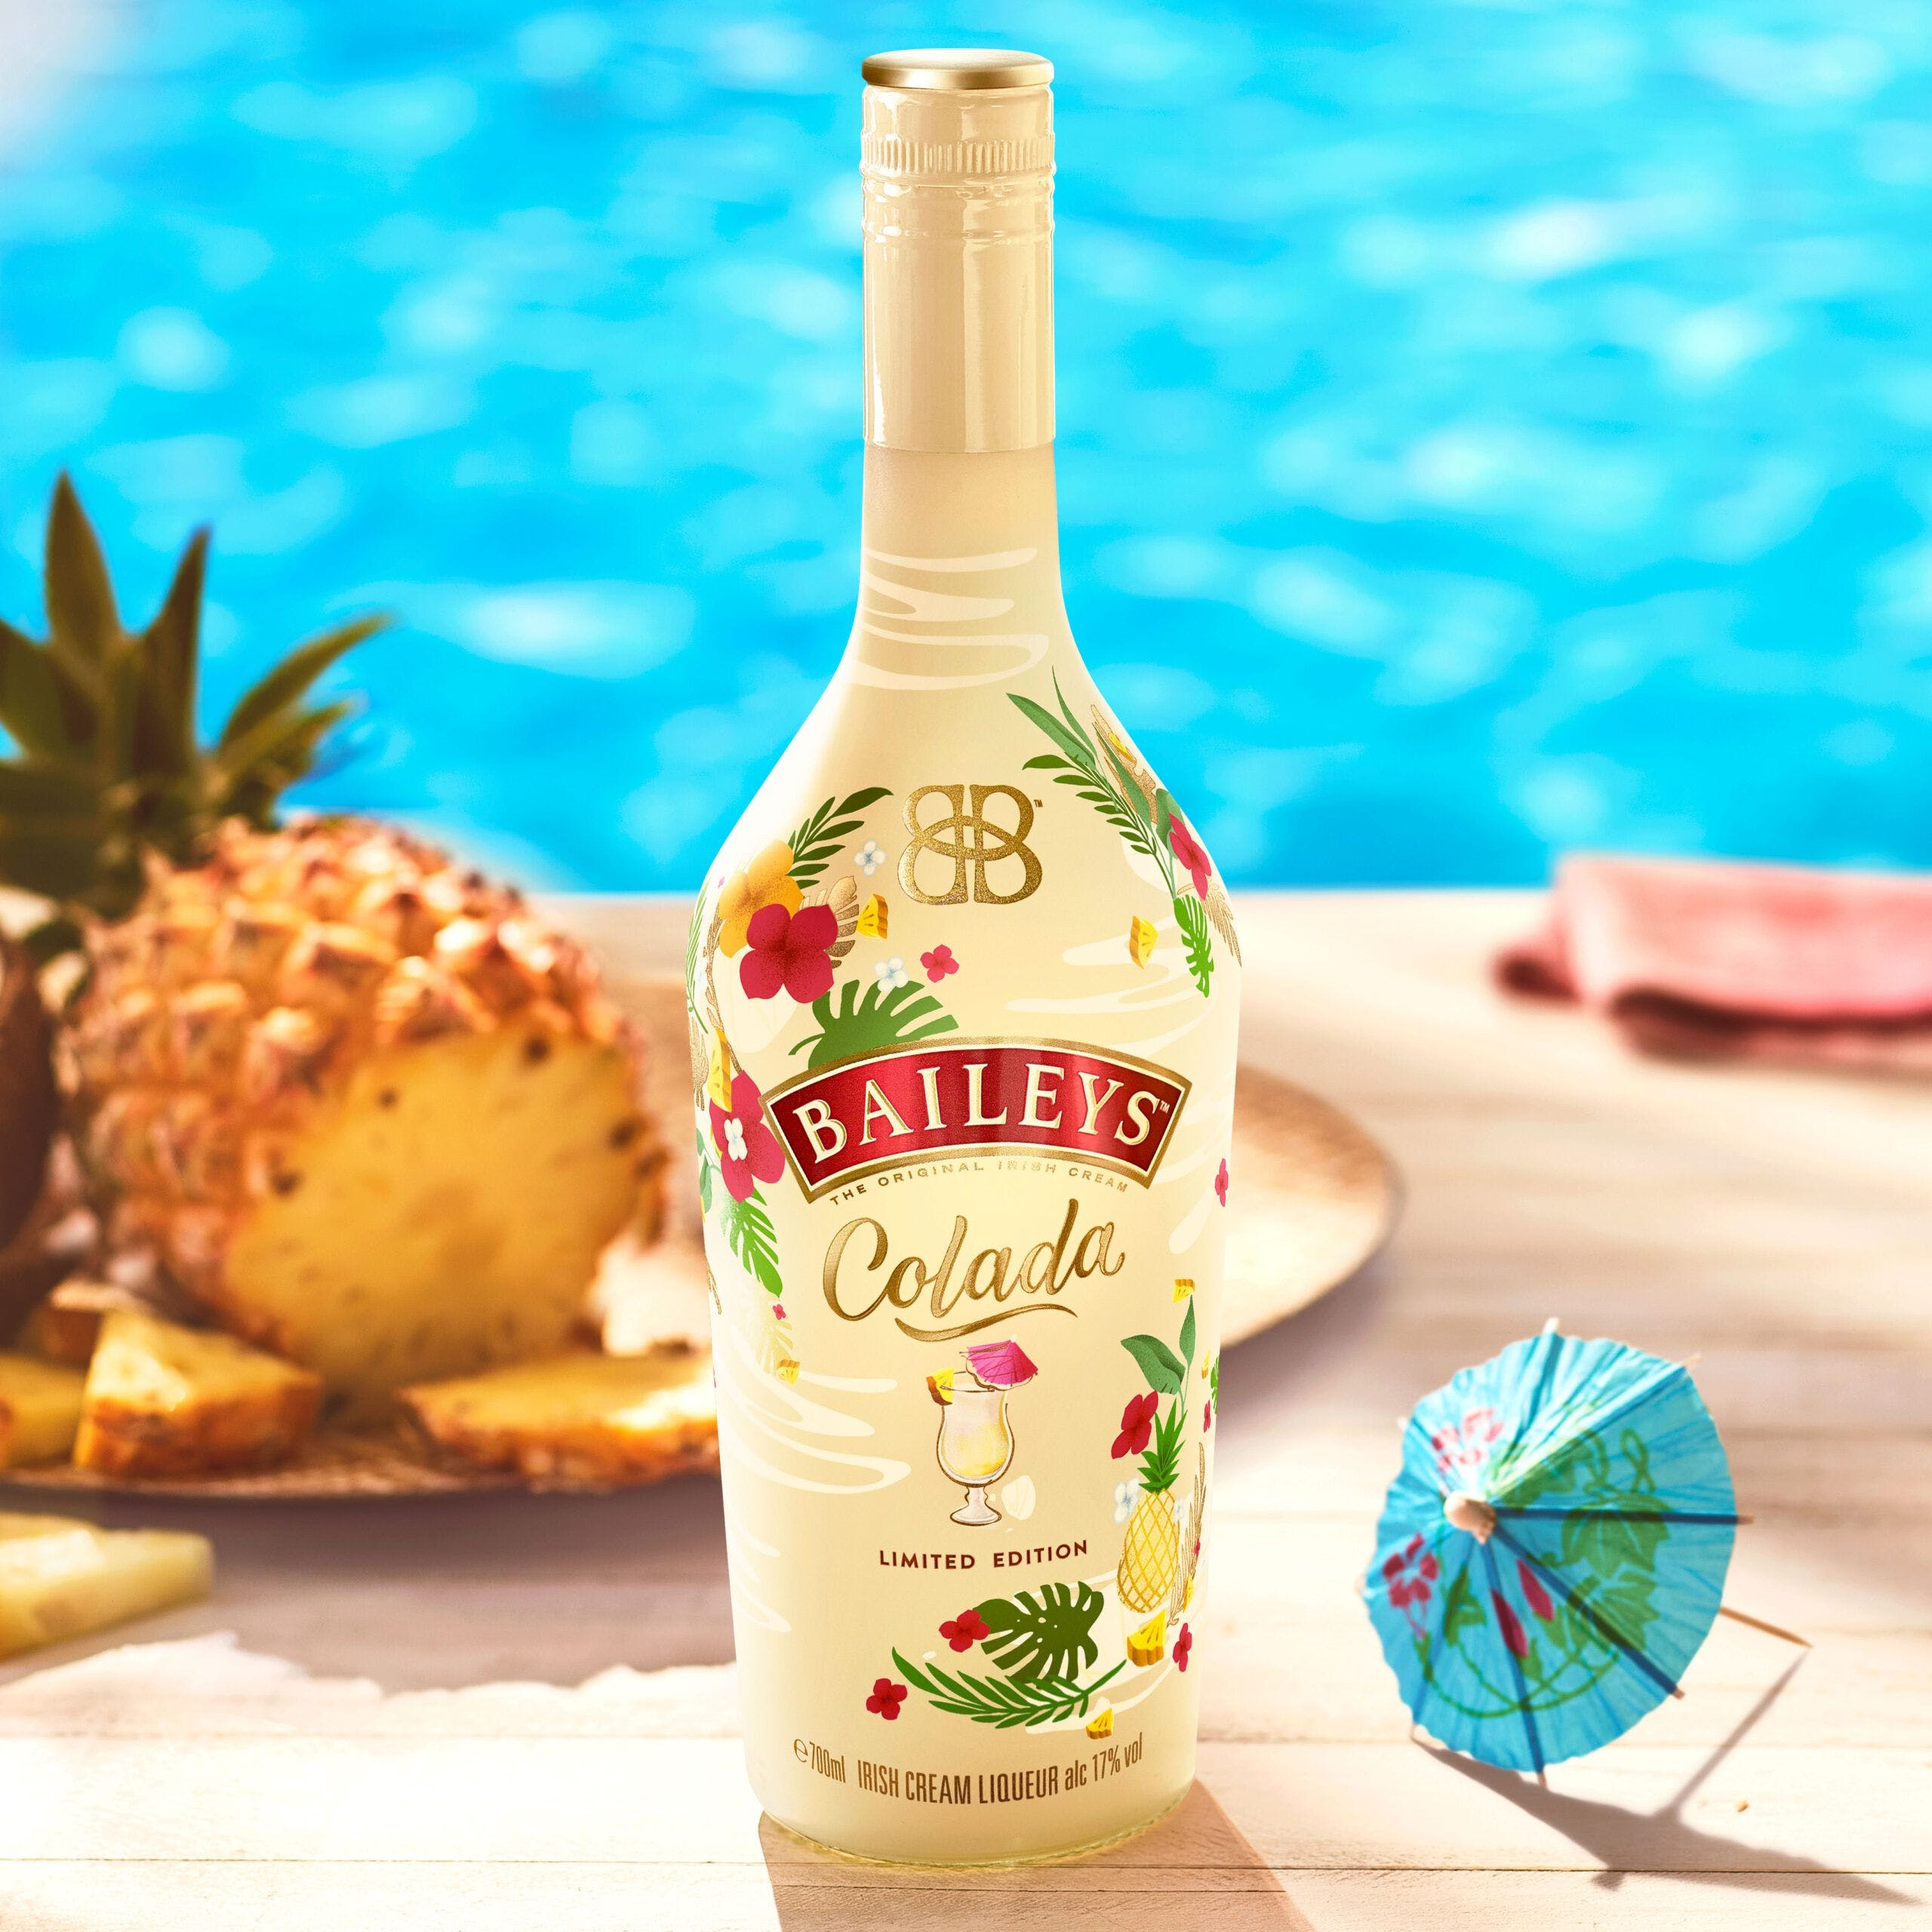 Baileys Colada has arrived in Of the Coco - House NOW Bottle Available Club UK! from The